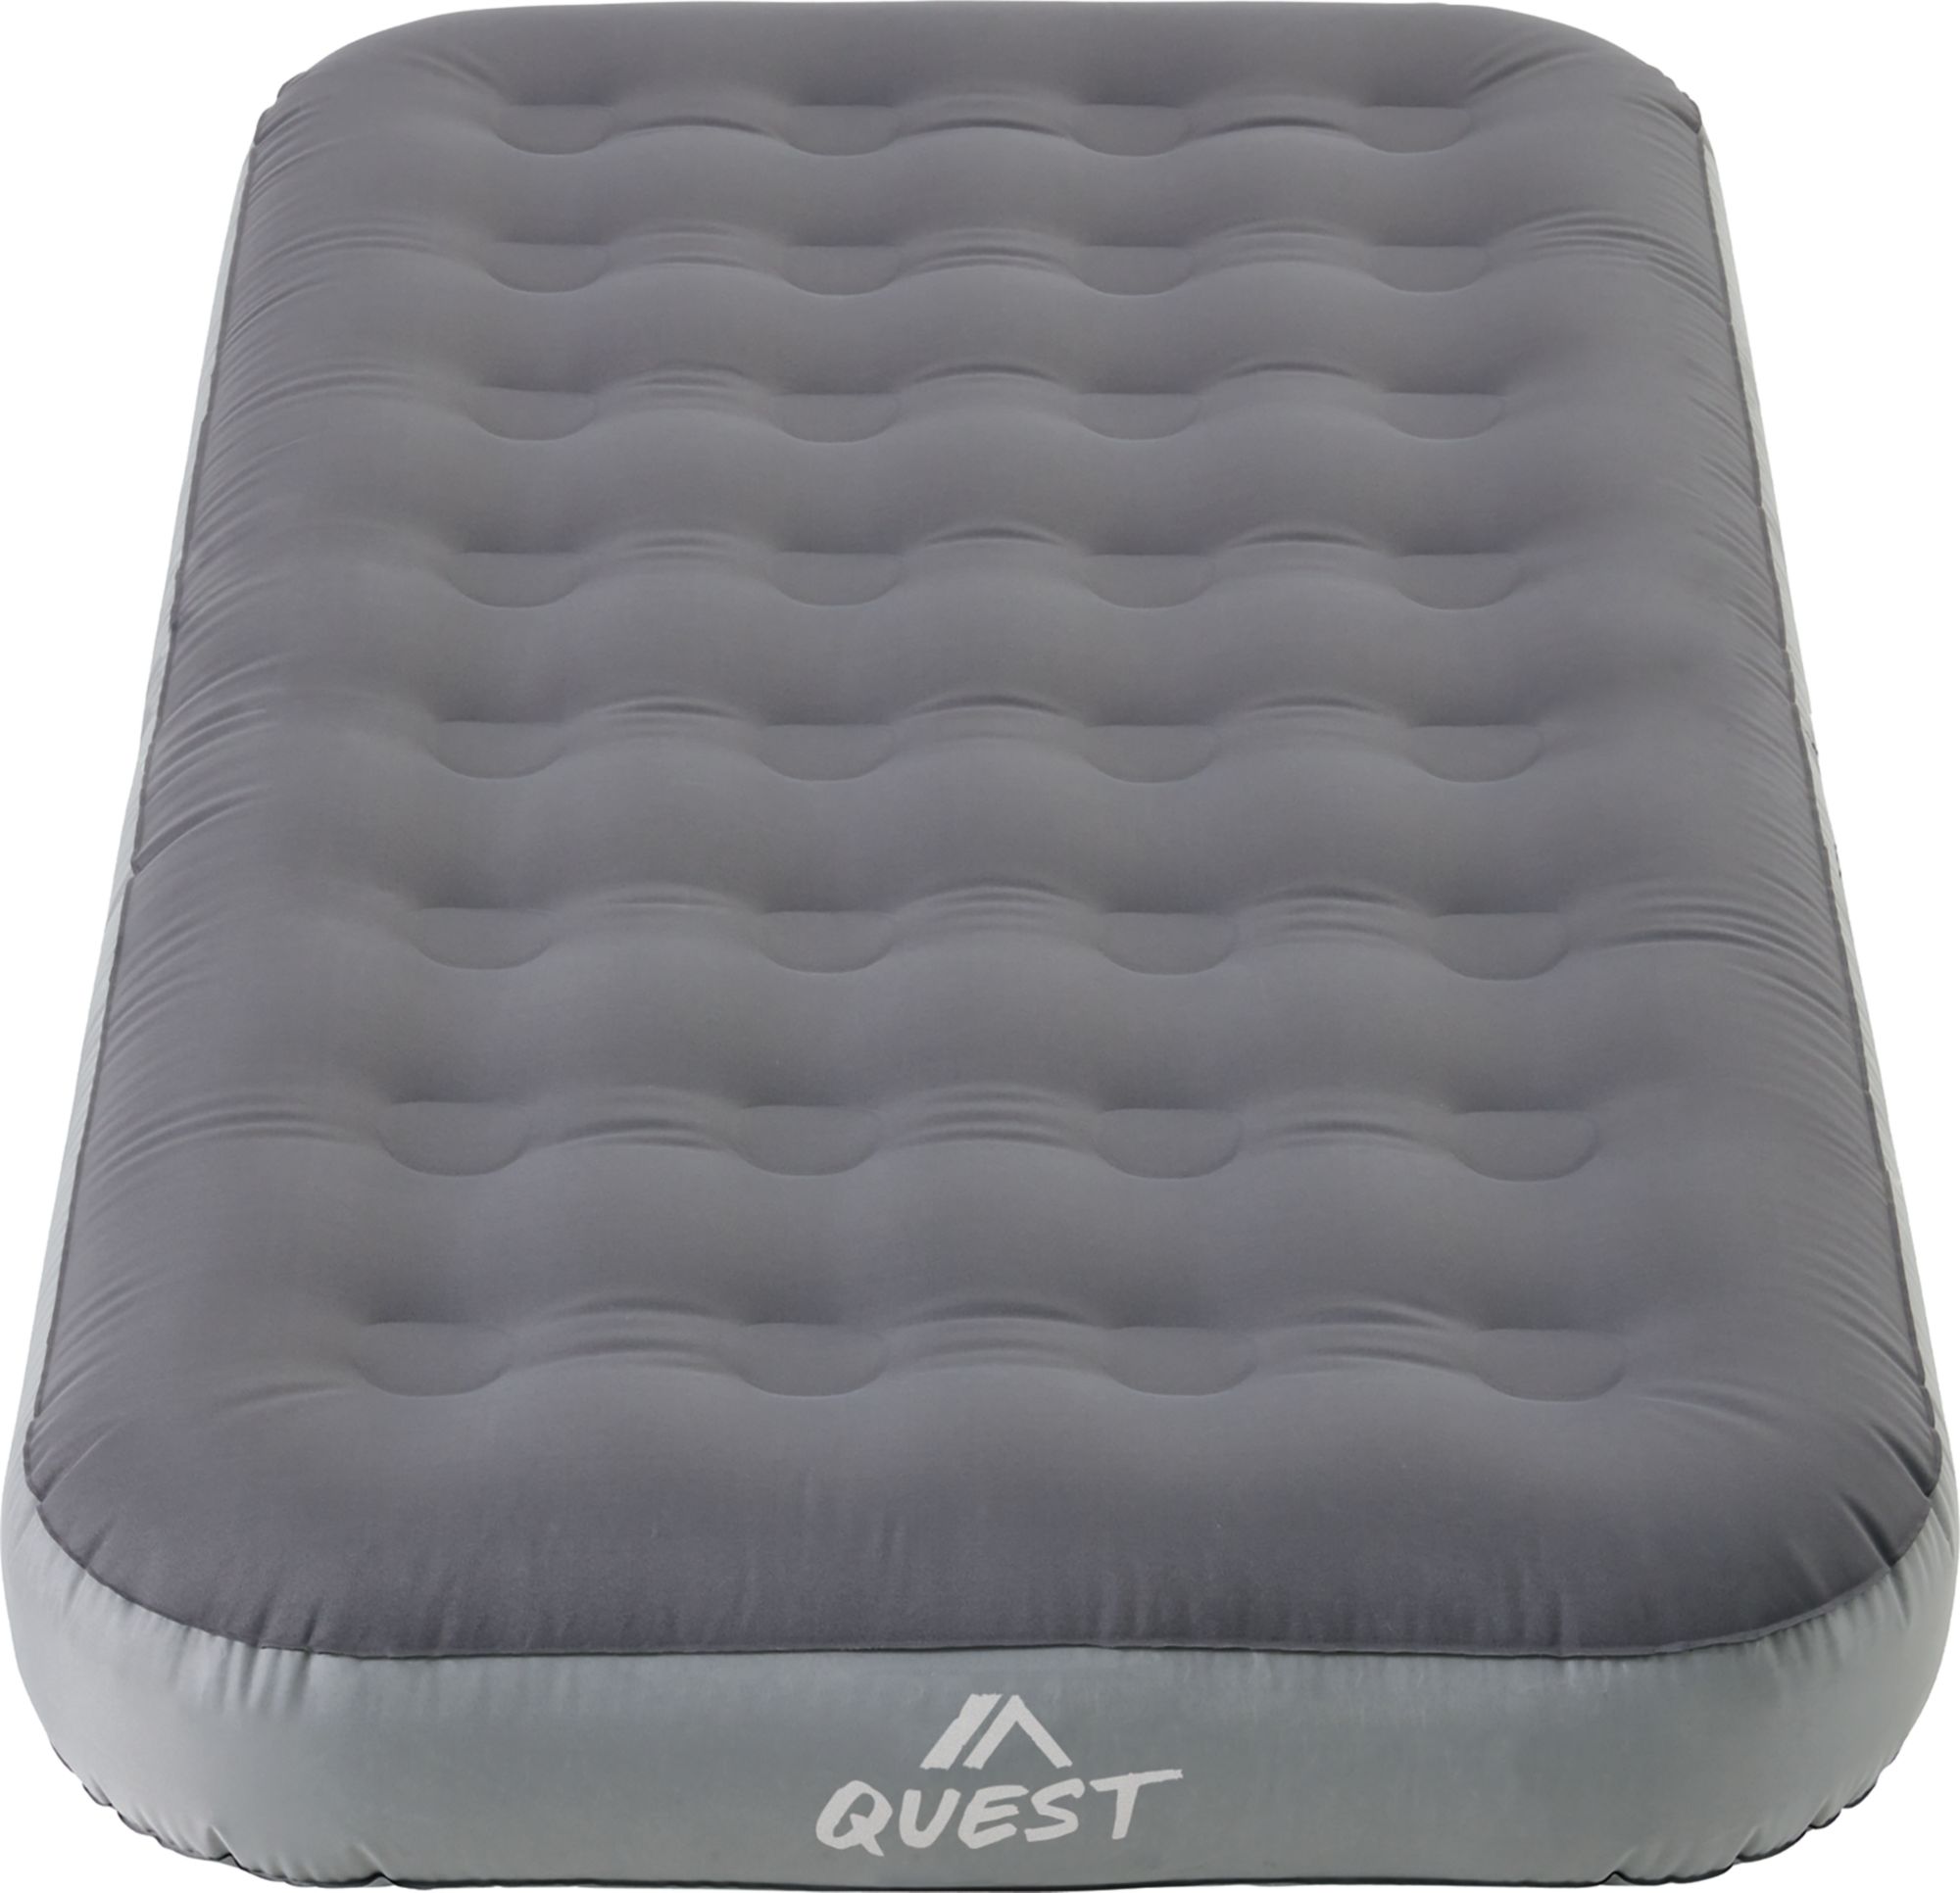 Quest Rugged Twin Airbed